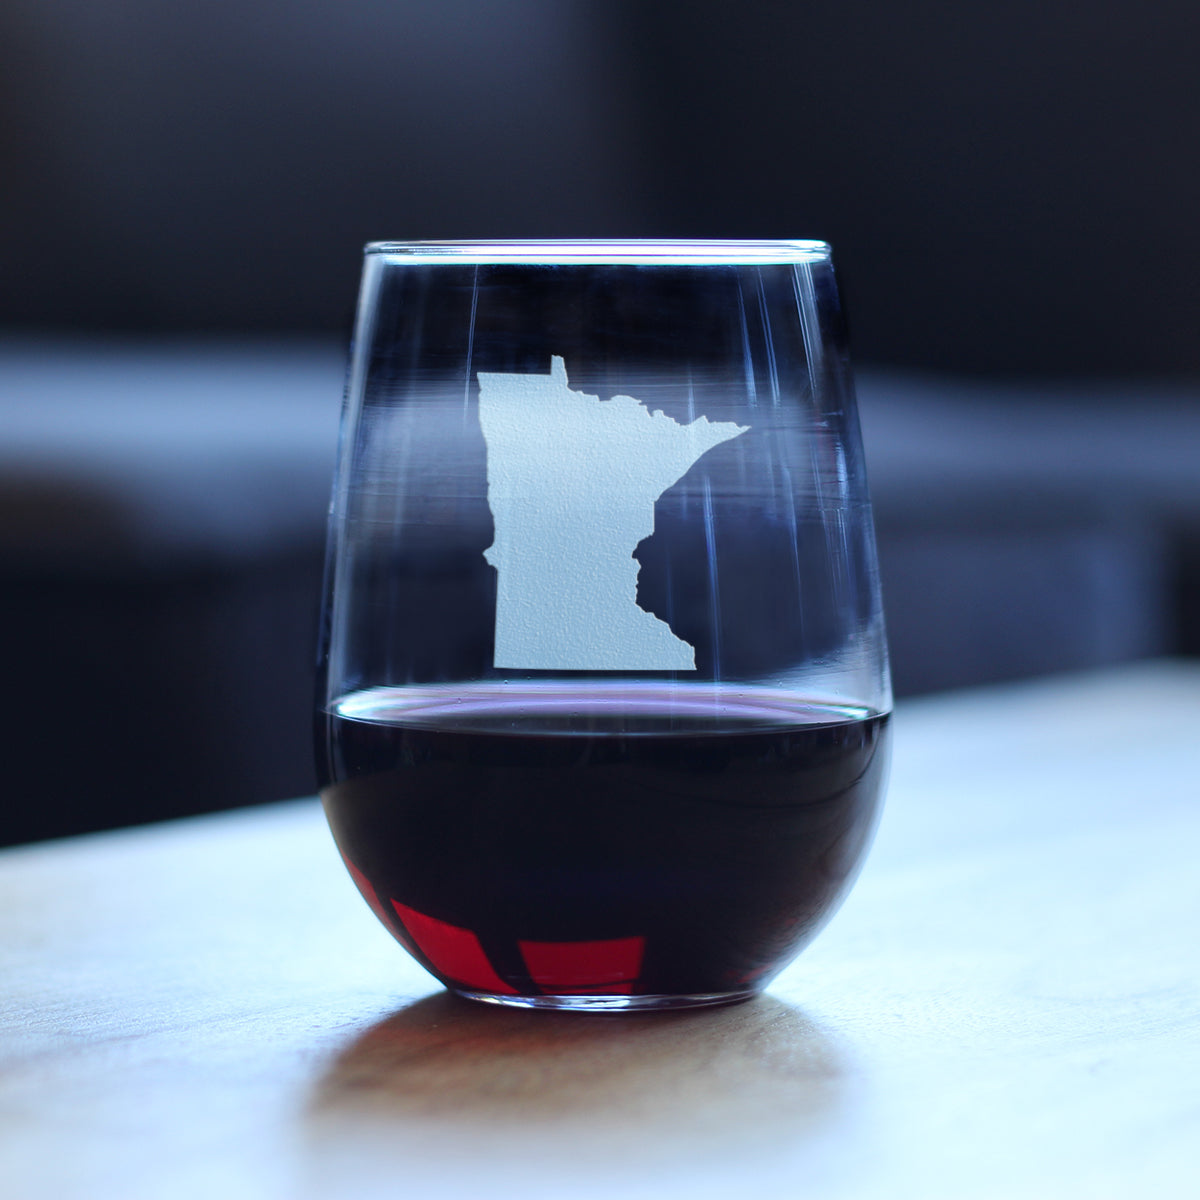 Minnesota State Outline Stemless Wine Glass - State Themed Drinking Decor and Gifts for Minnesotan Women &amp; Men - Large 17 Oz Glasses